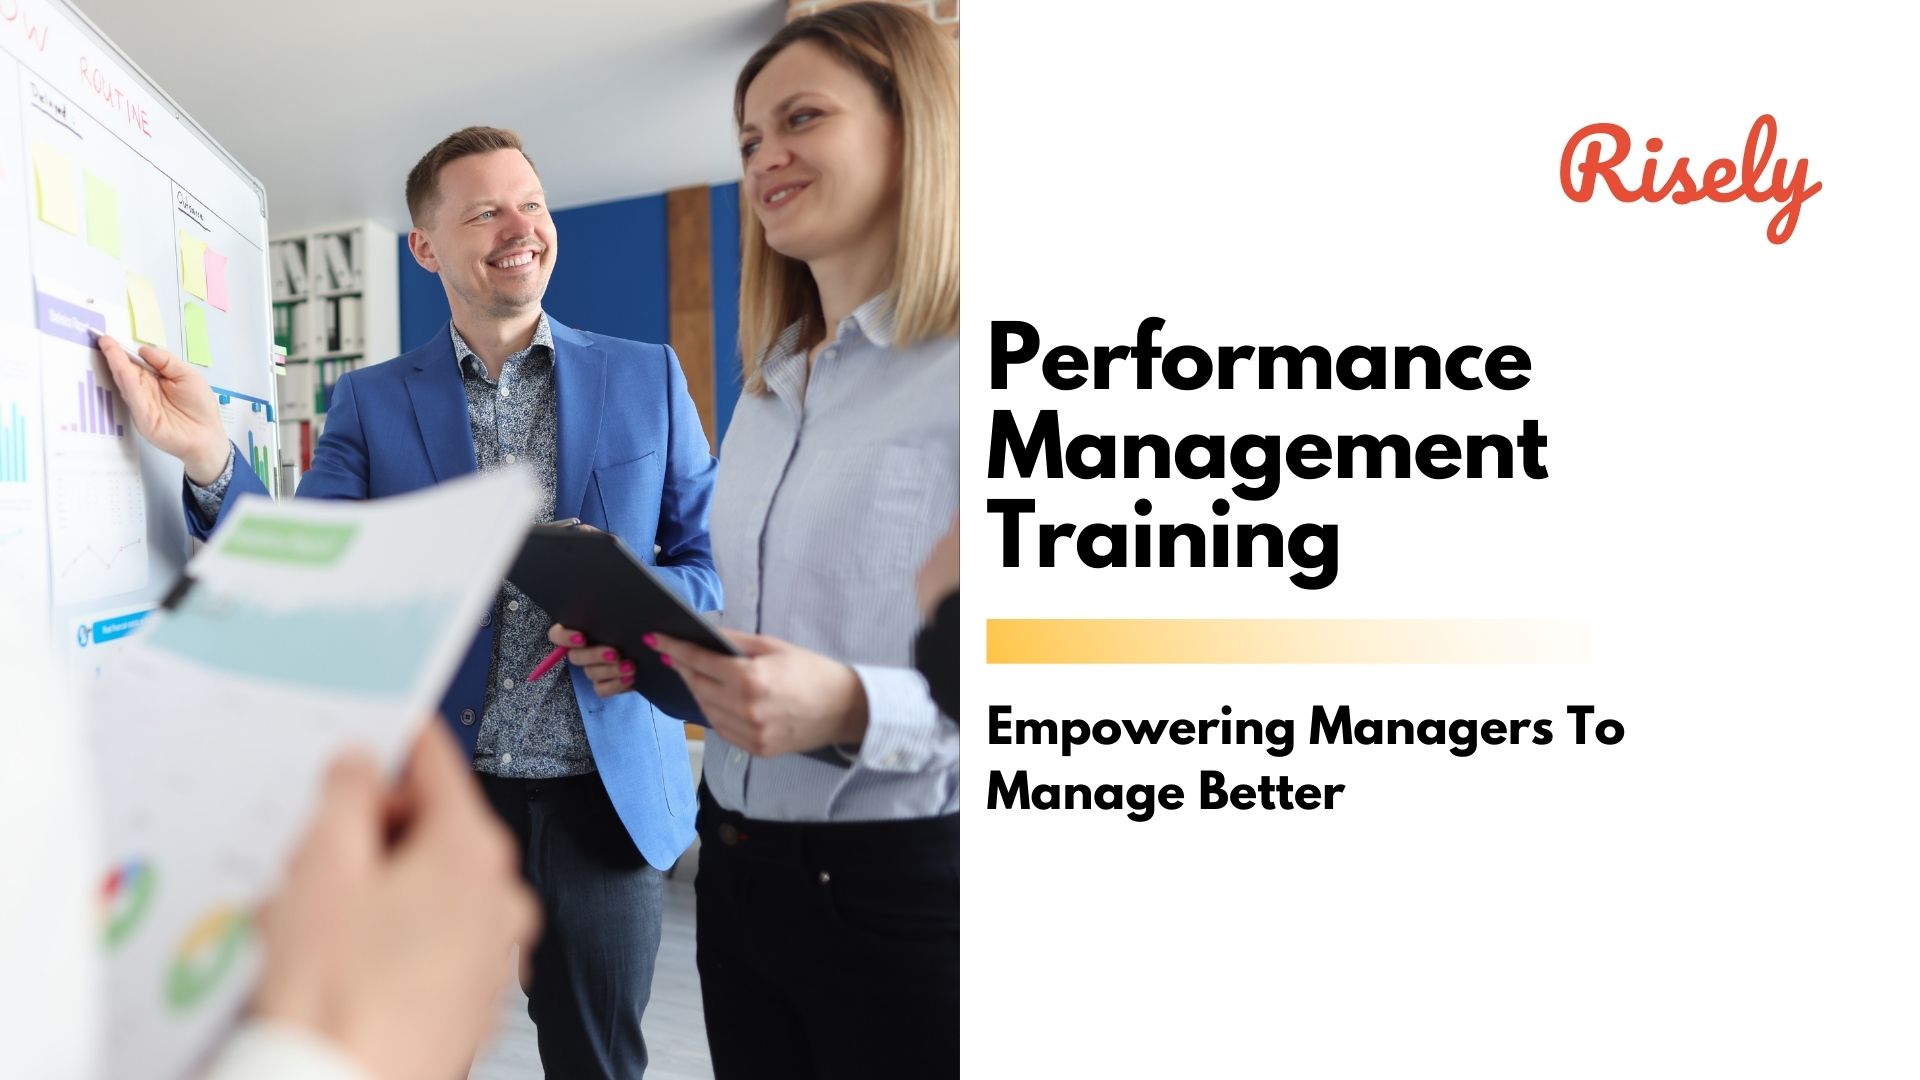 Performance Management Training: Empowering Managers To Manage Better